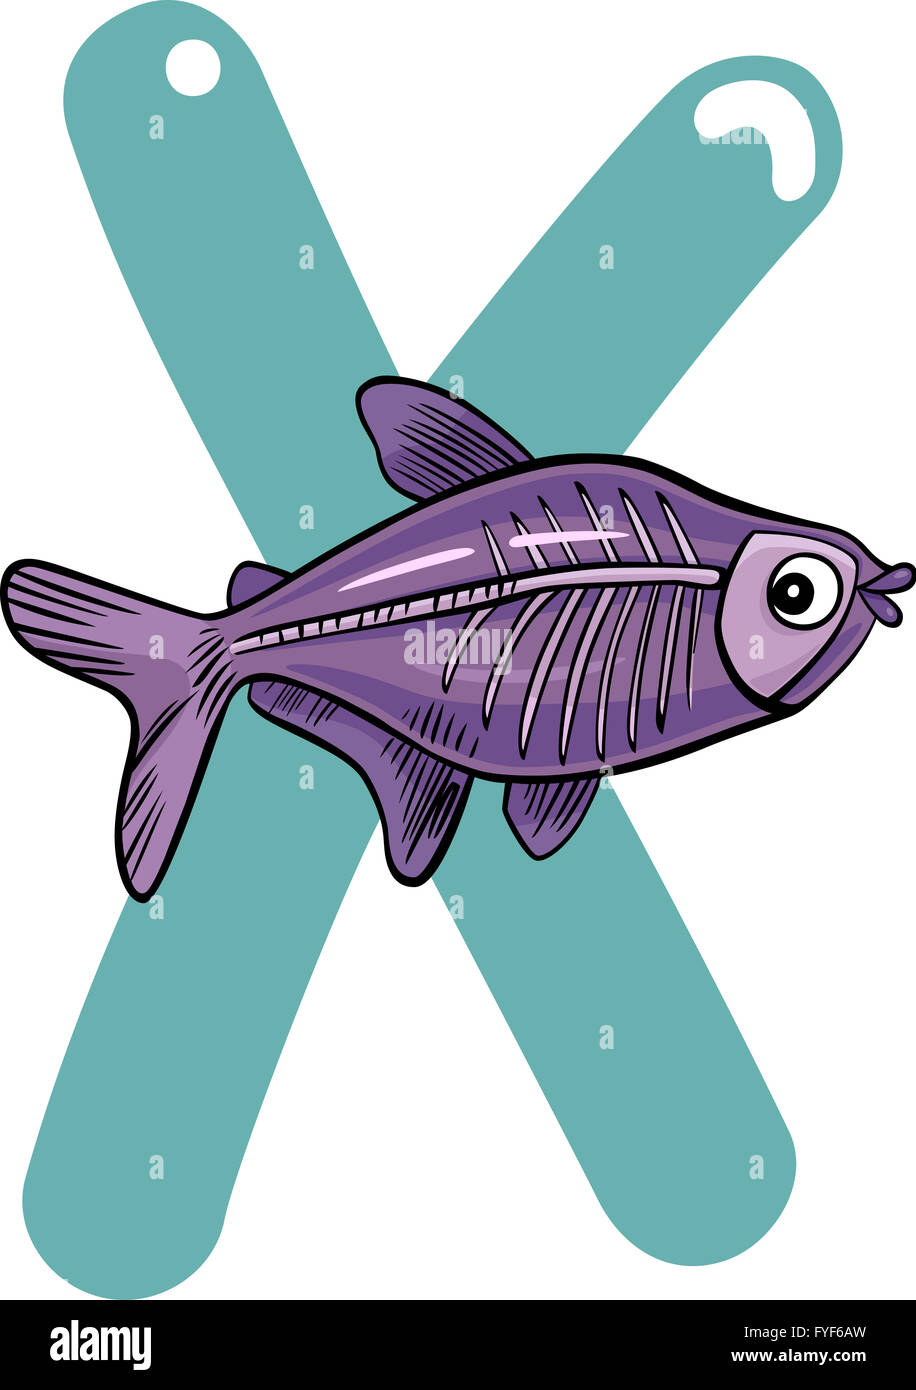 X for x-ray fish Stock Photo